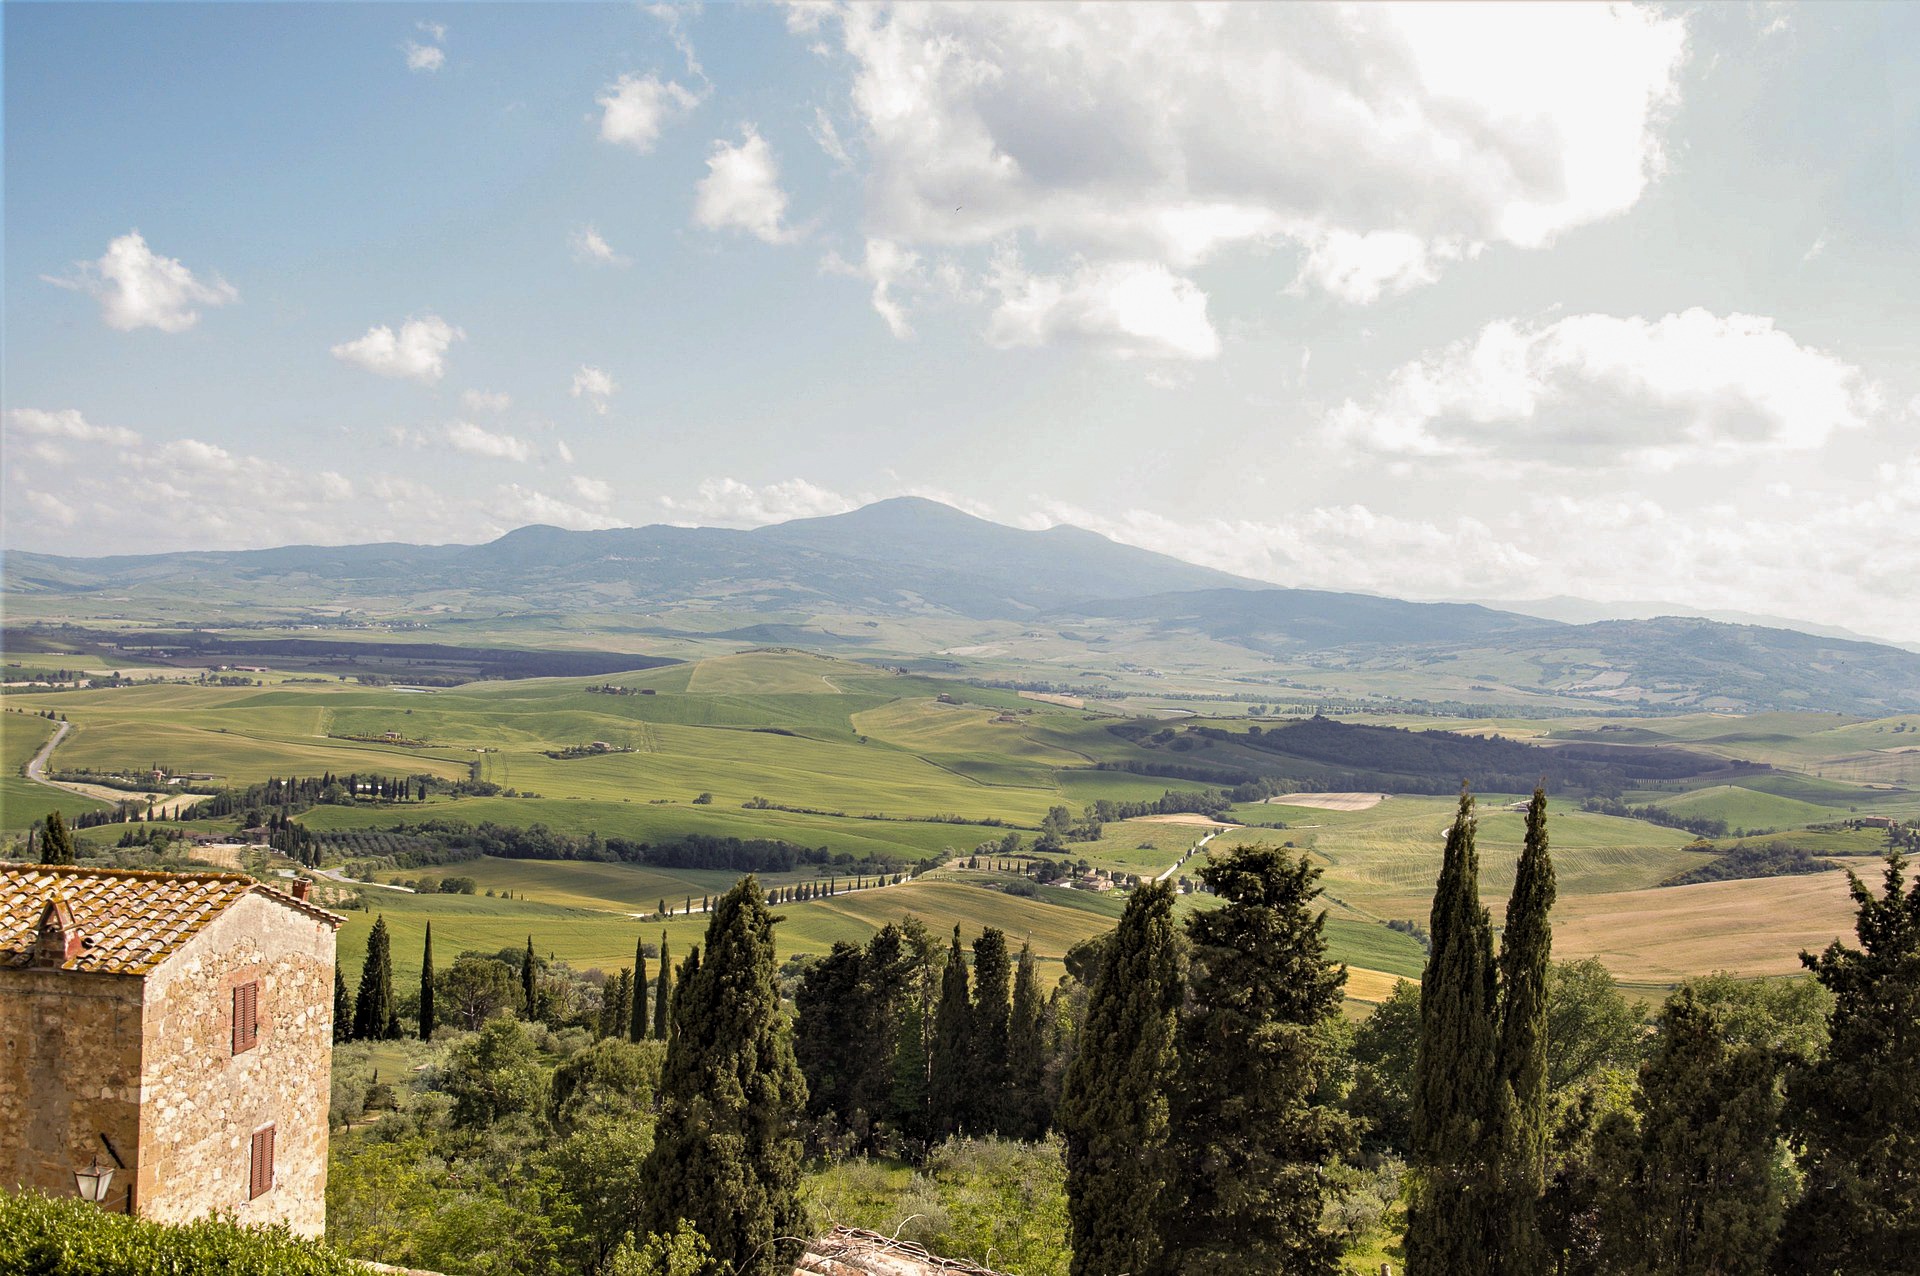 Pienza is a hilltop Tuscan town located in the region of Val d’Orcia of the province of Siena. This romantic town offers visitors panoramic views of the beautiful Tuscan countryside in Italy.